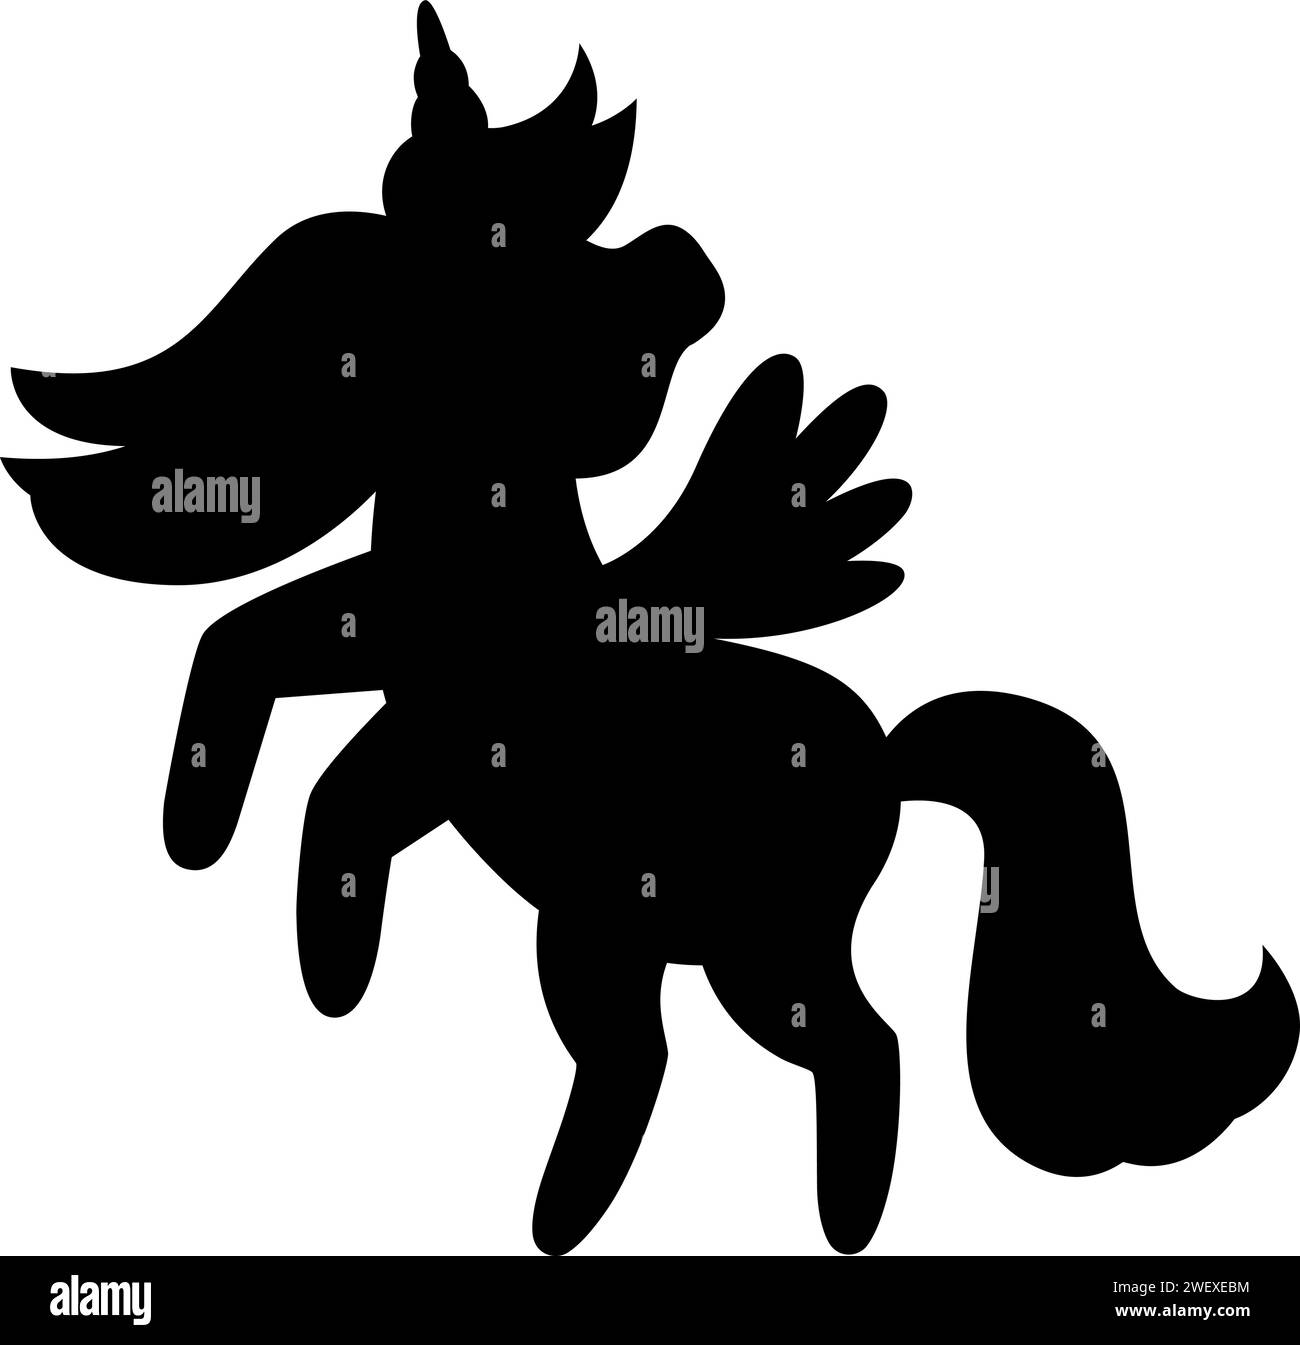 Vector black unicorn silhouette. Fantasy animal shadow. Fairytale horse character illustration for kids. Cartoon magic creature icon isolated on white Stock Vector